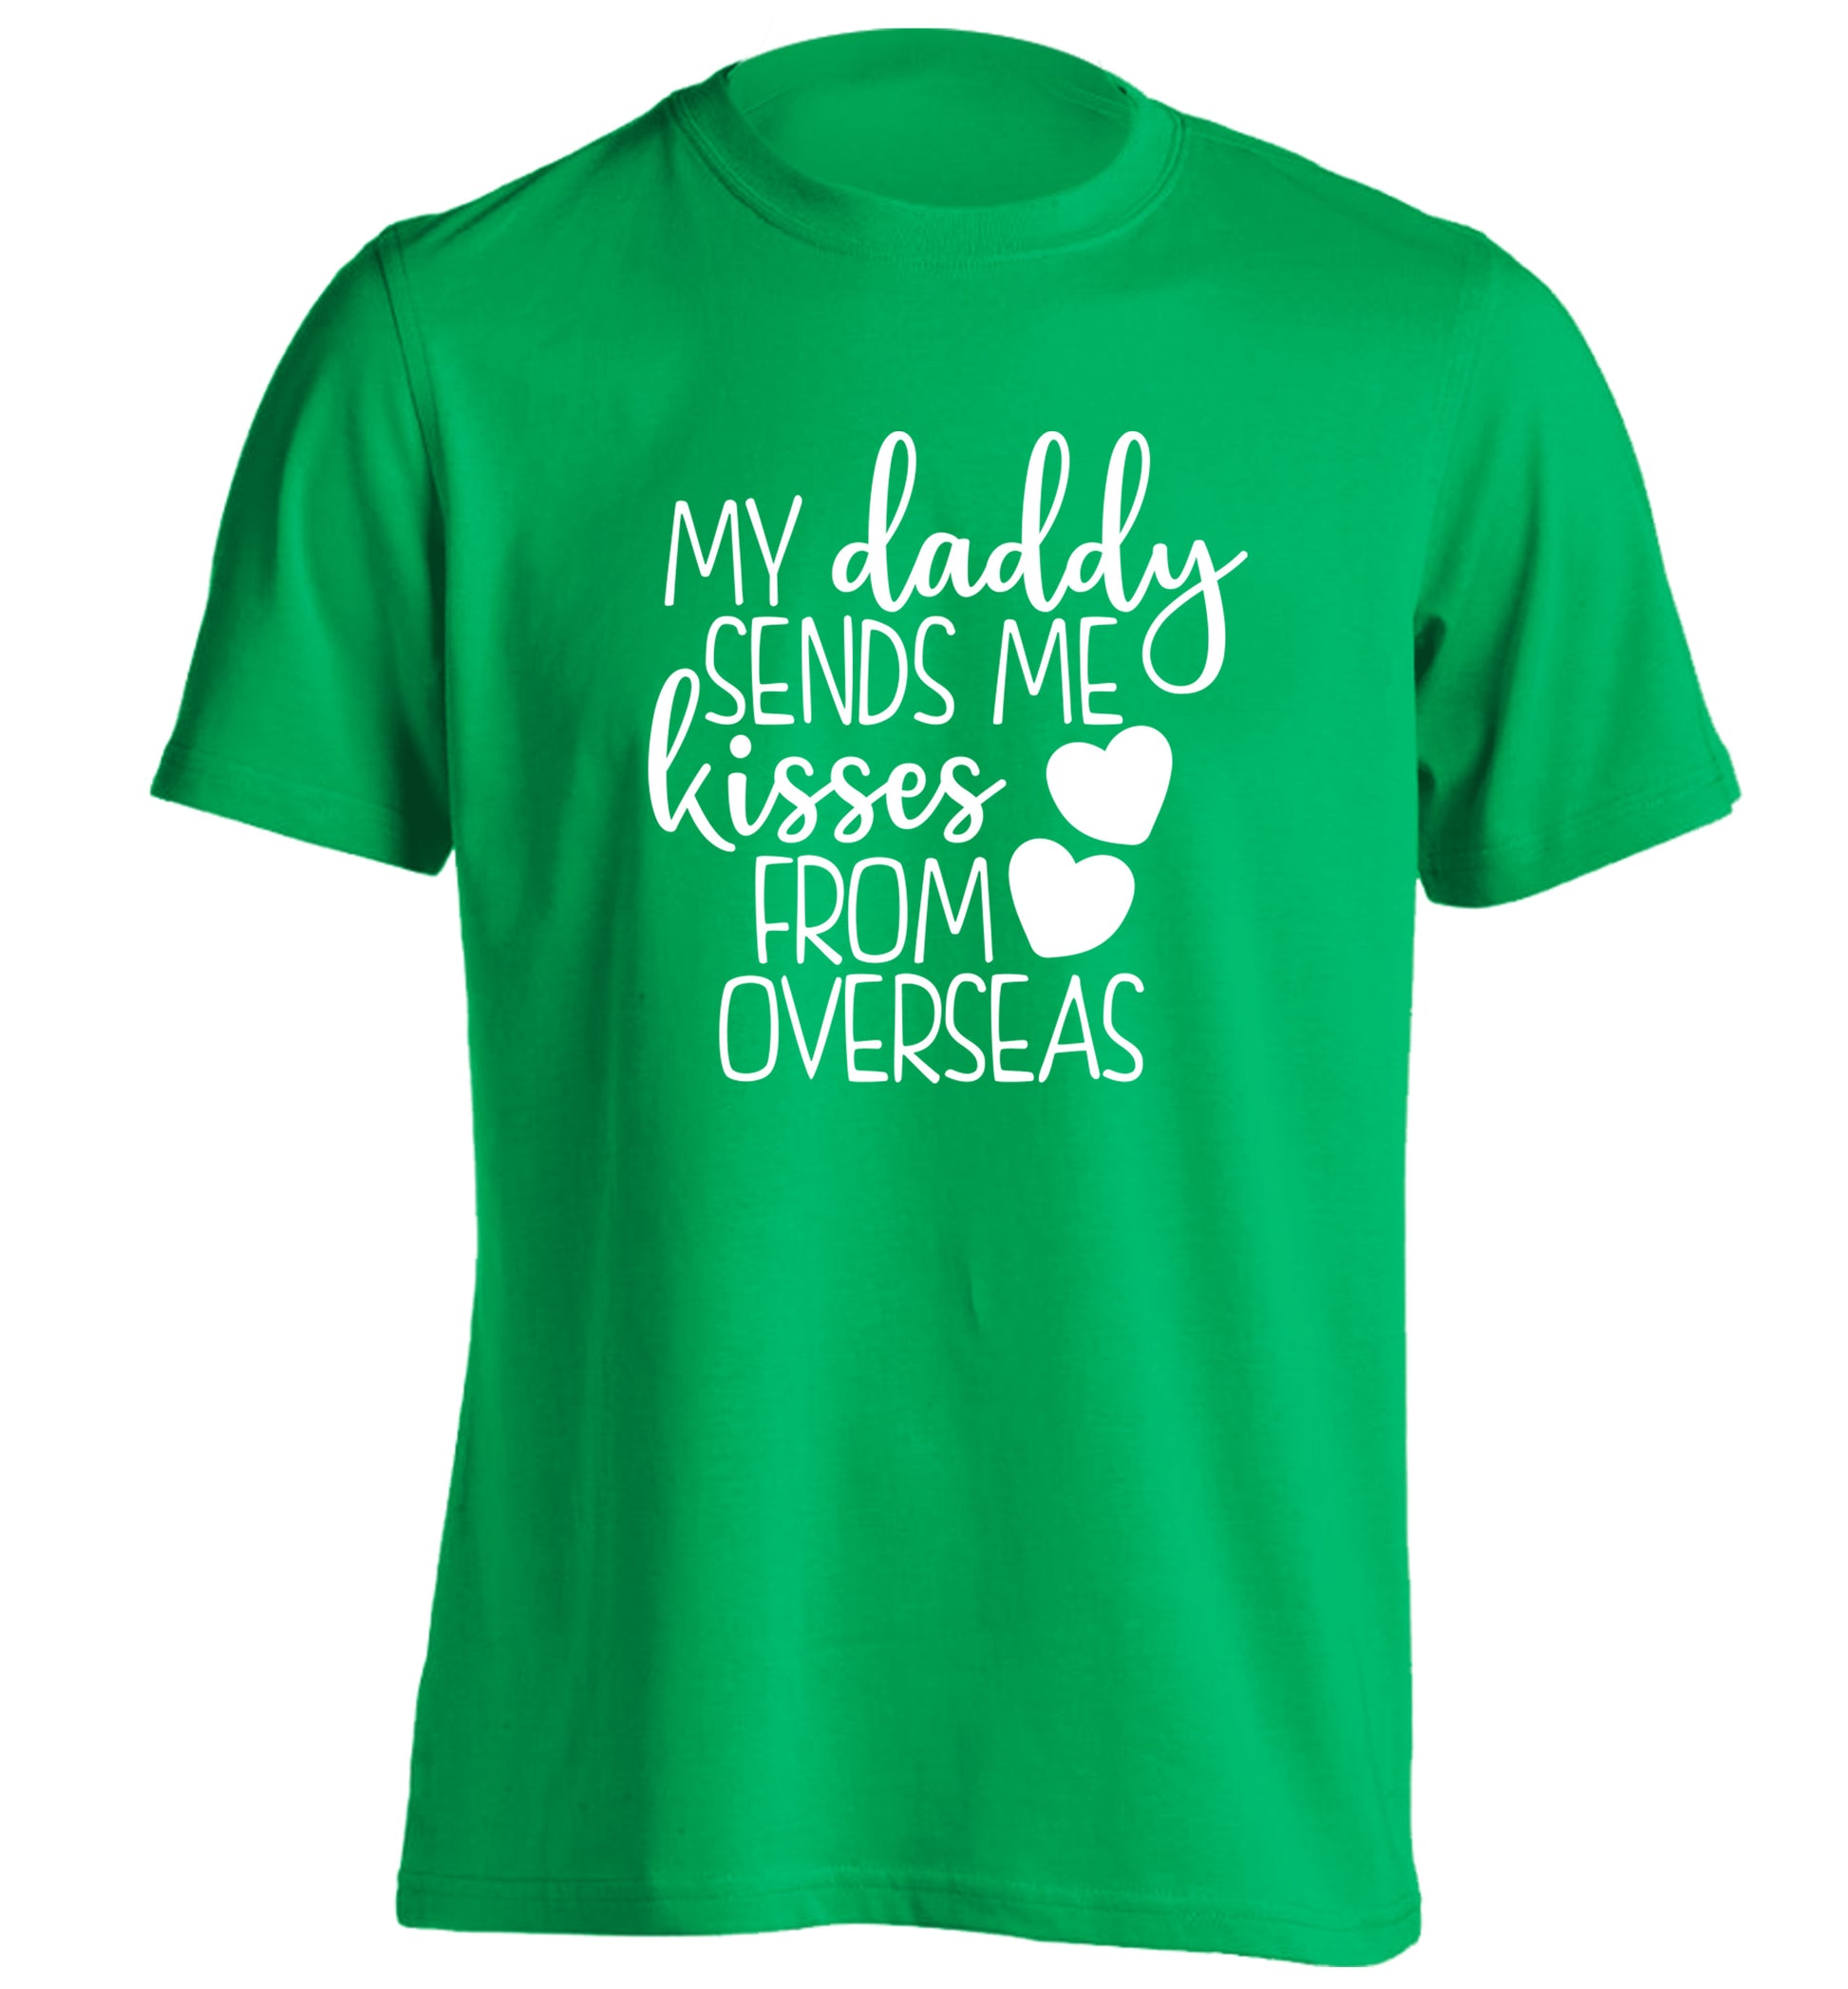 My daddy sends me kisses from overseas adults unisex green Tshirt 2XL